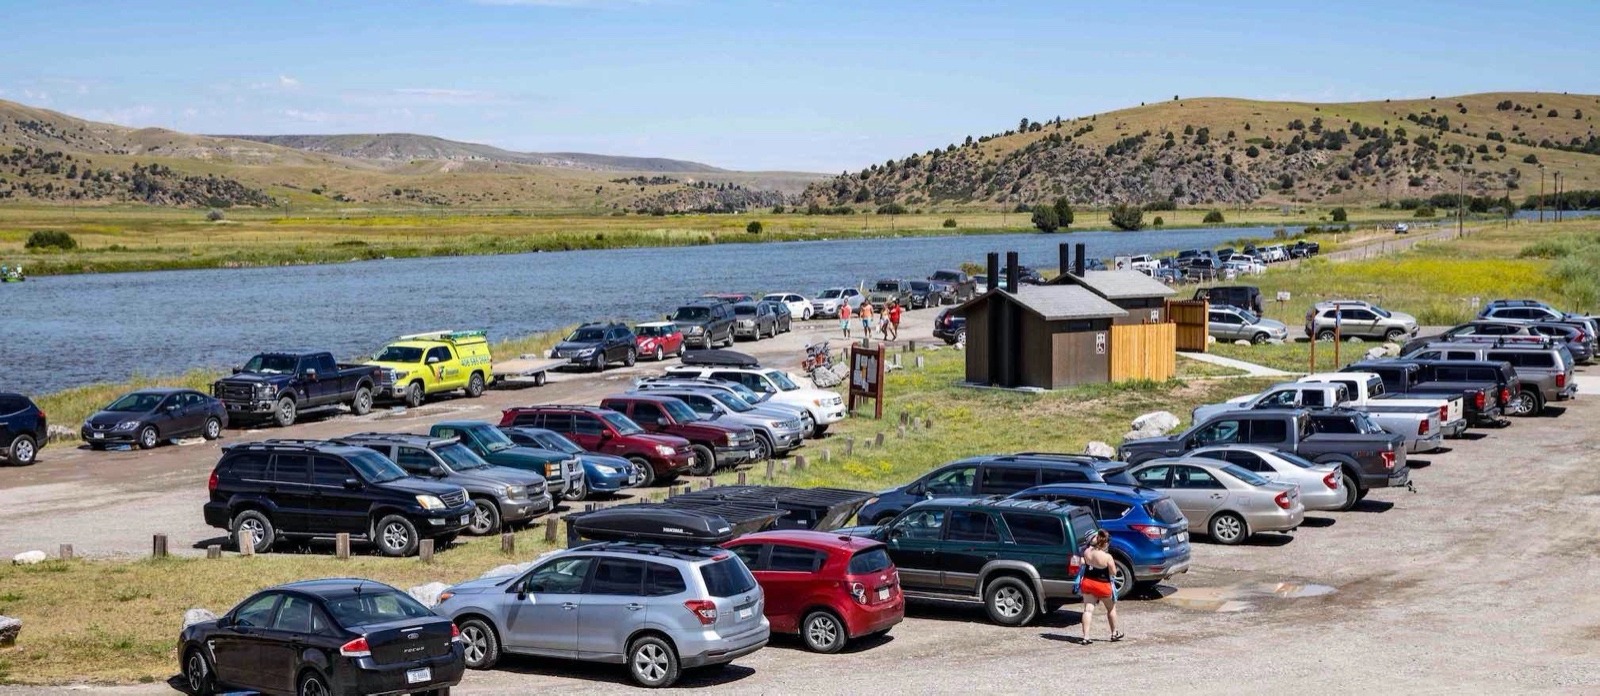 This is actually the scene of a slow day at a take-out when tubers upstream took to the Madison River west of Bozeman this summer. Whereas this middle stretch attracts thousands upon thousands of floaters on inflatables and stand up paddle boards, the Upper Madison is dealing with its own issues, involving conflict between recreational anglers, commercial operators and others who say heavy fishing pressure and hooking mortality, along with hot summers bringing lower flows and warmer water, is certain to, at some point, negatively impact the wild, naturally-reproducing trout fishery. Photo by Todd Wilkinson